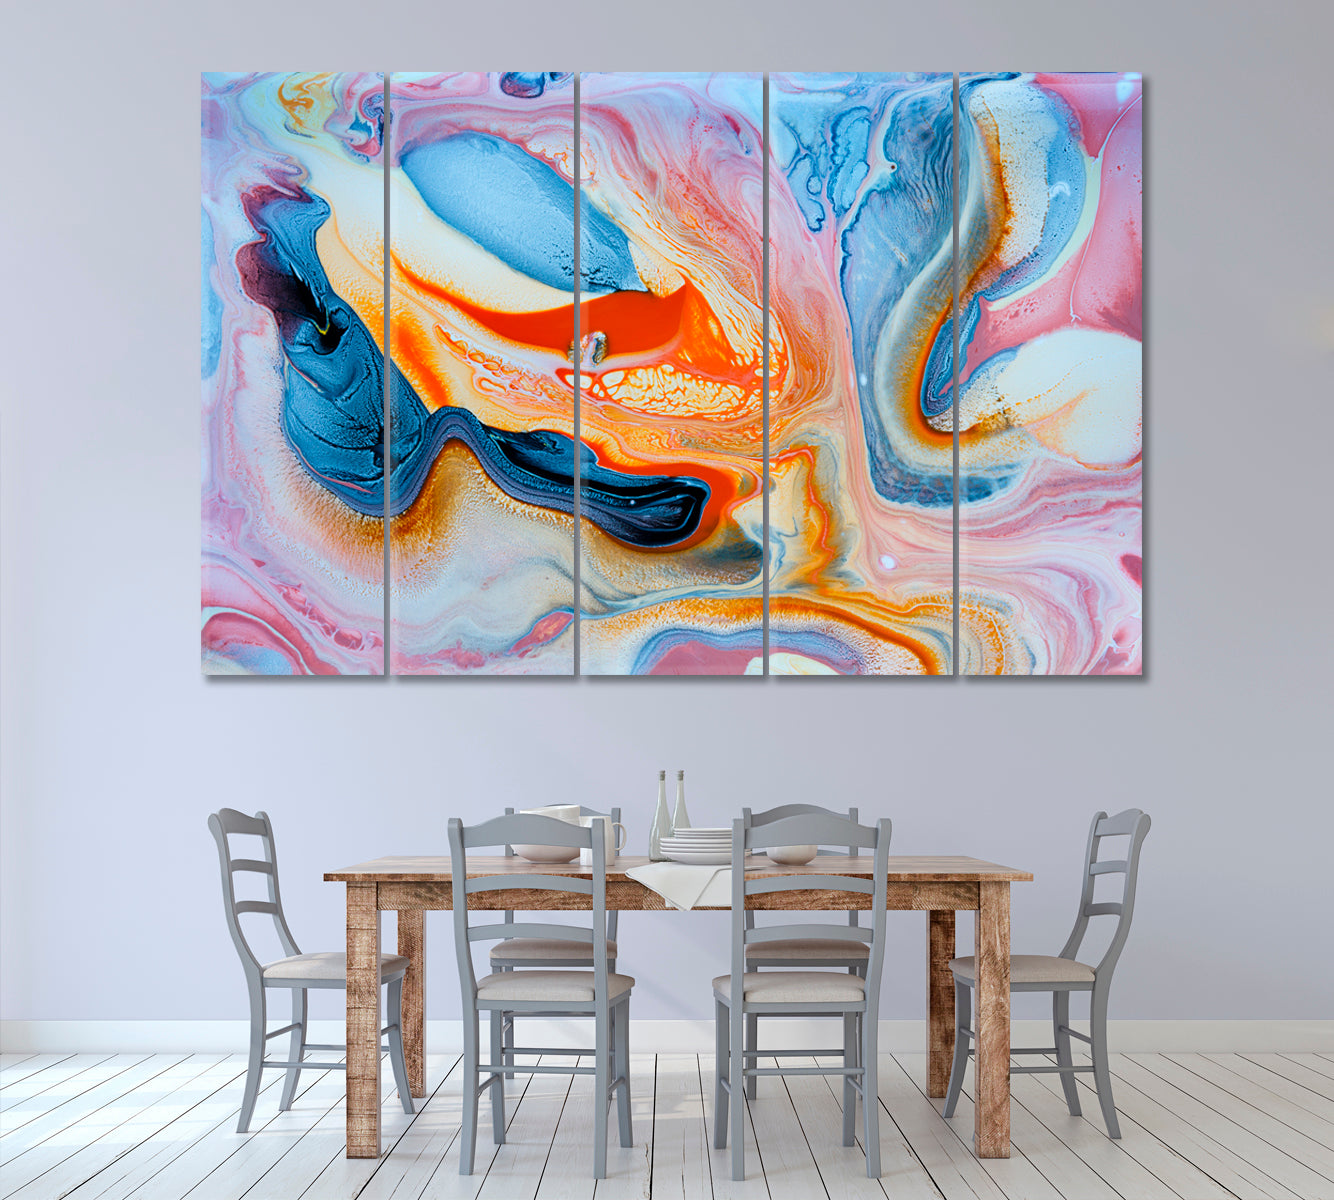 Abstract Mix Acrylic Paint Canvas Print ArtLexy 5 Panels 36"x24" inches 